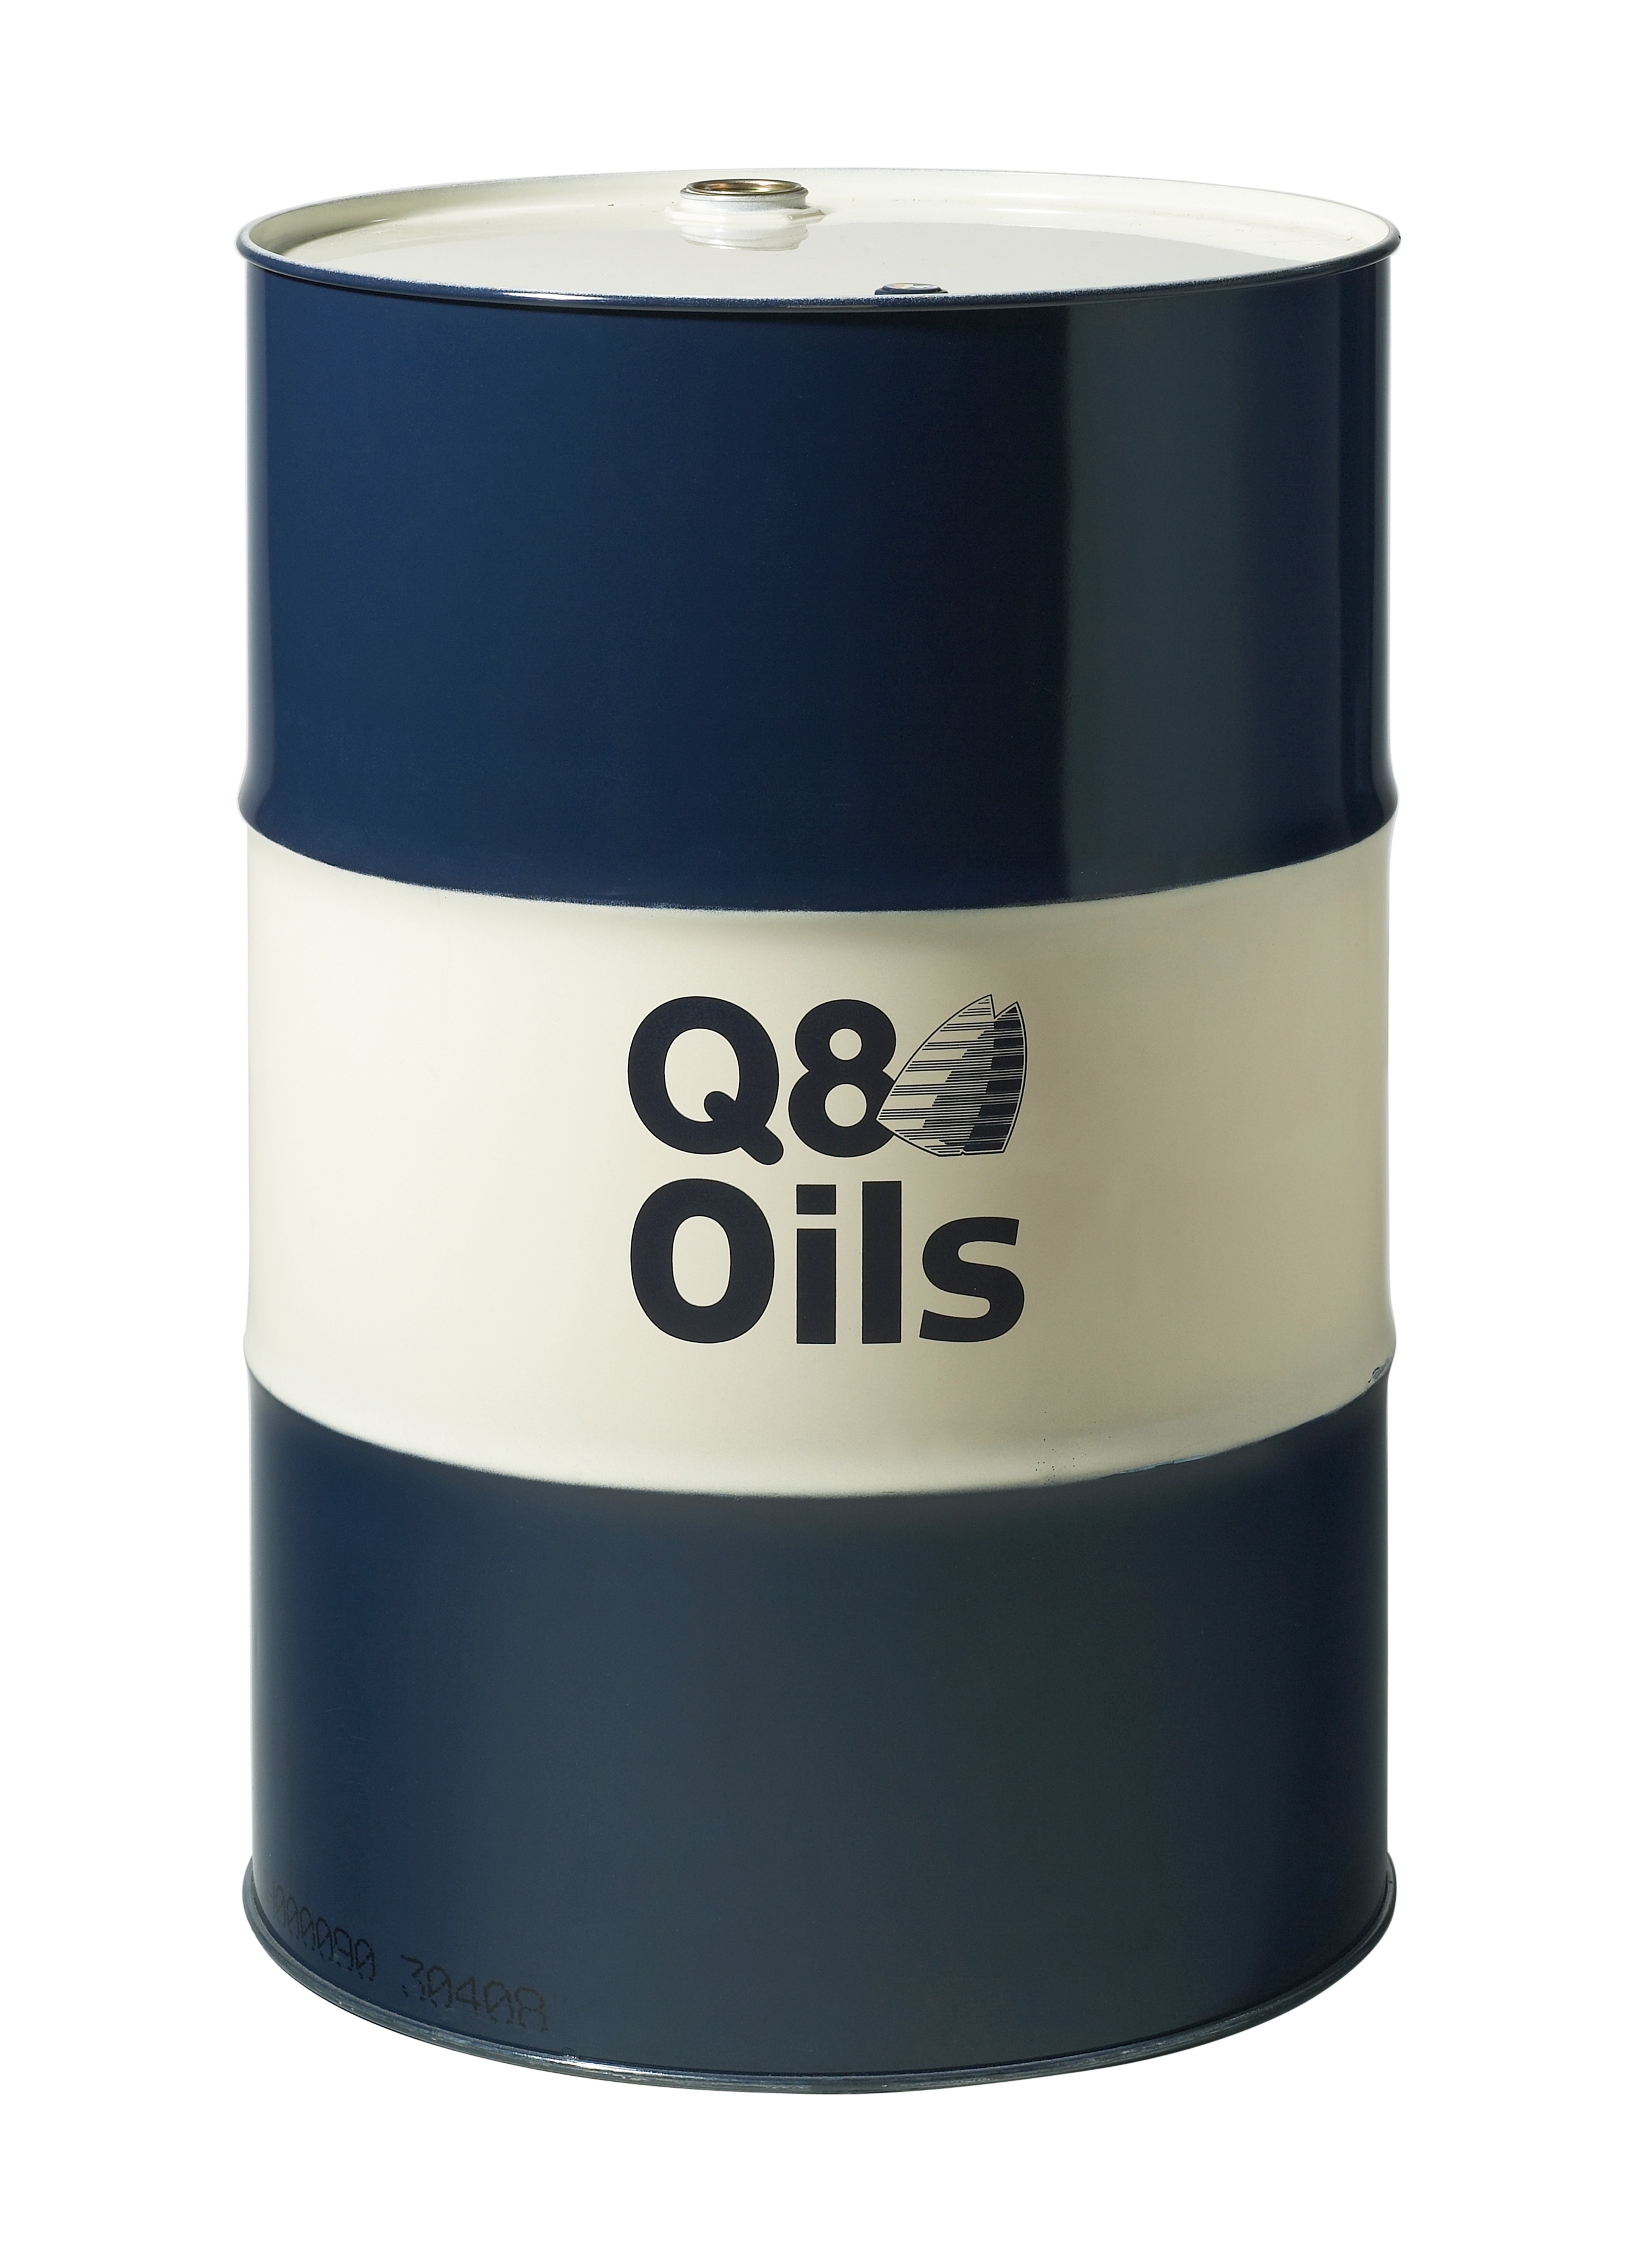 Q8Oils introduces specially-formulated engine oil for VW passenger cars